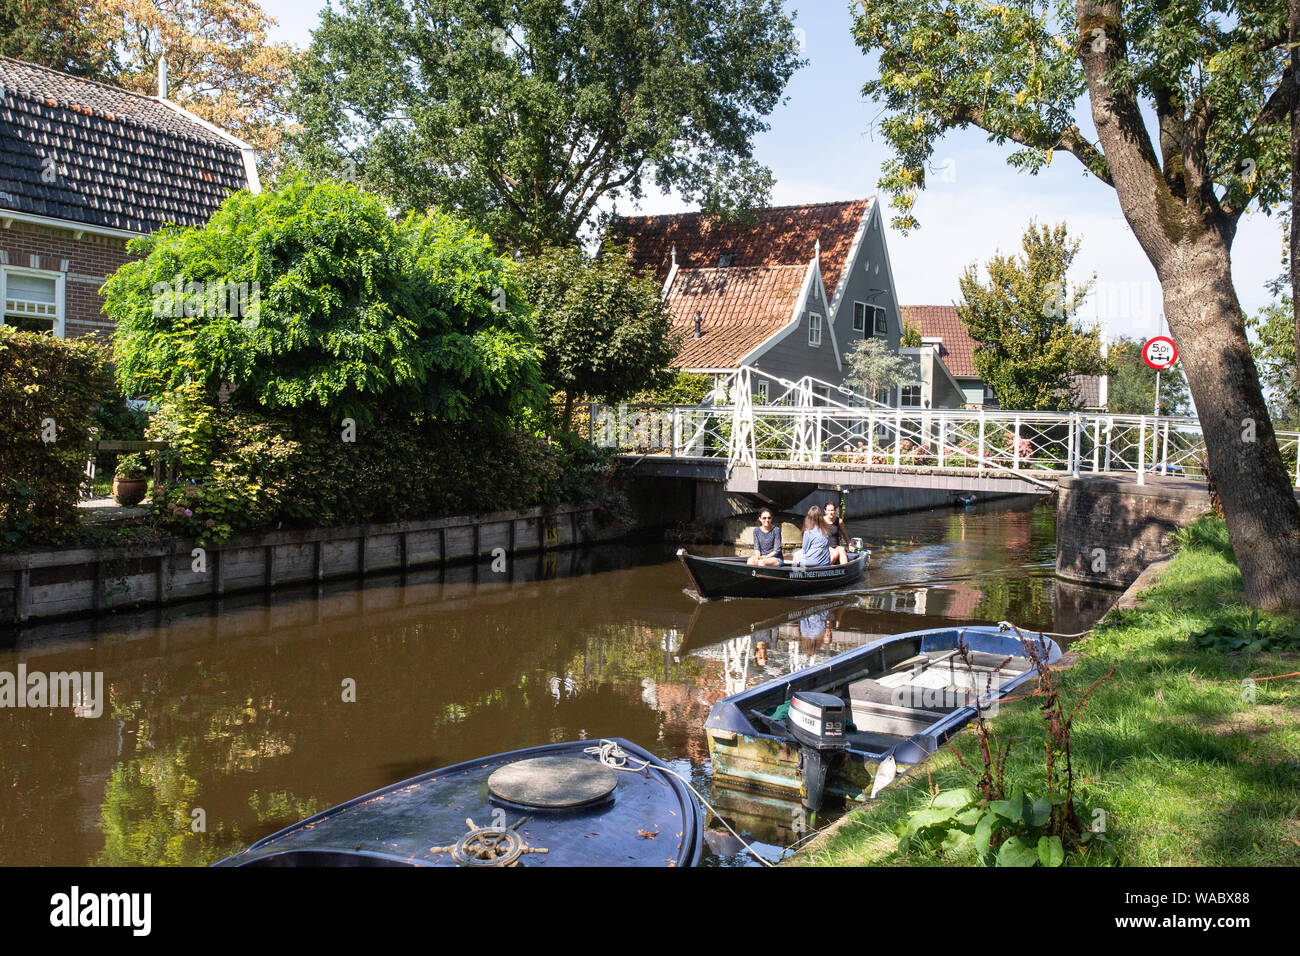 BROEK IN WATERLAND, NETHERLANDS - SEPTEMBER 1, 2018: Scenic view Broek in Waterline in North Holland with architecture and people rowing on the canal. Stock Photo